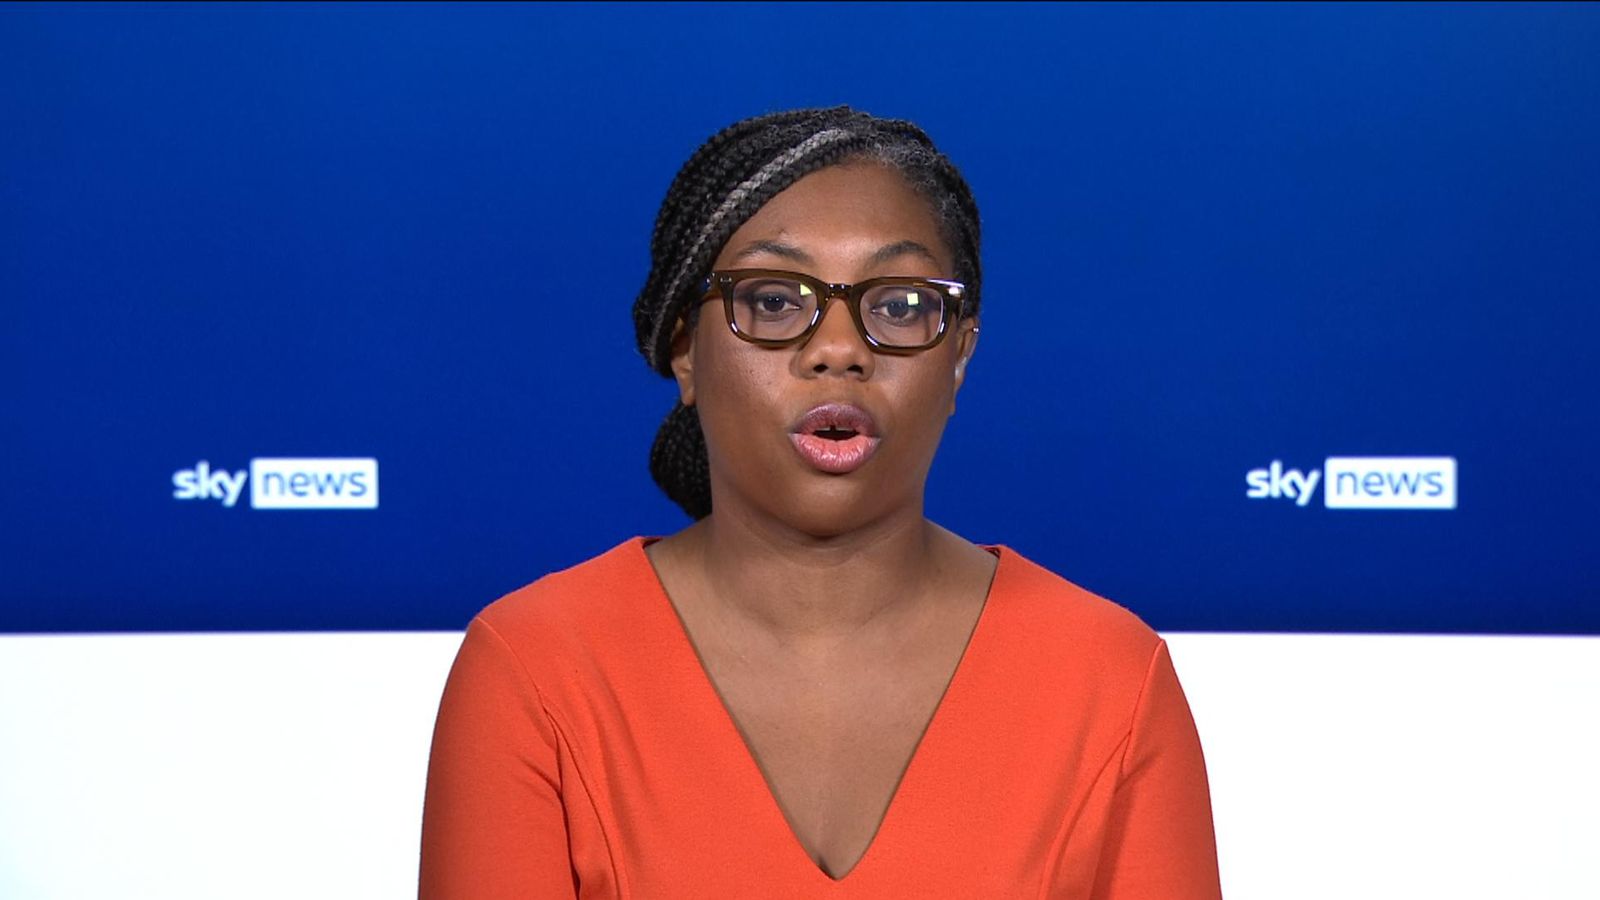 ‘They are not my friends:’ Kemi Badenoch distances herself from Tory rebels who want her as leader | Politics News